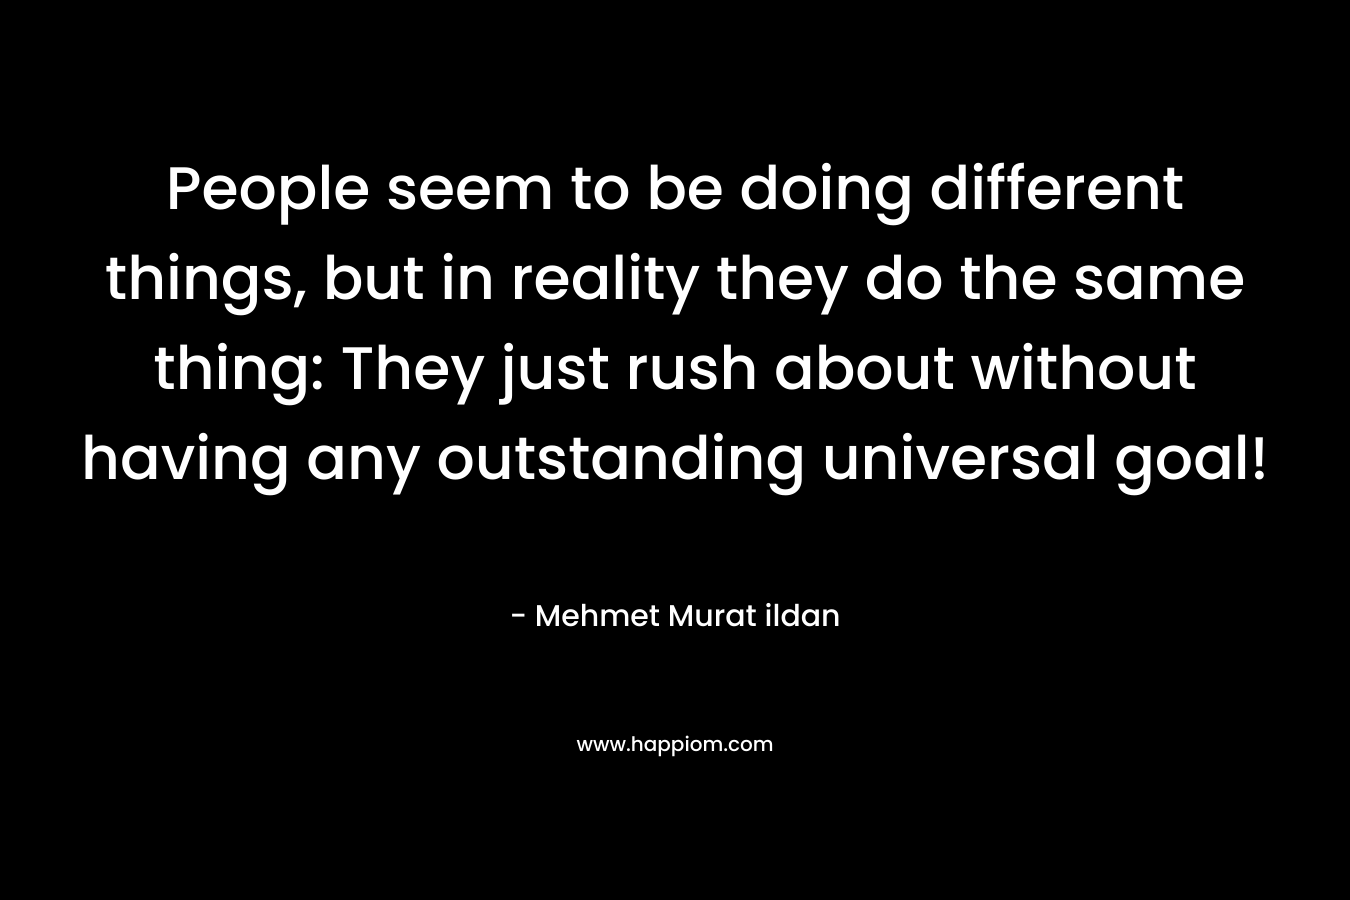 People seem to be doing different things, but in reality they do the same thing: They just rush about without having any outstanding universal goal! – Mehmet Murat ildan